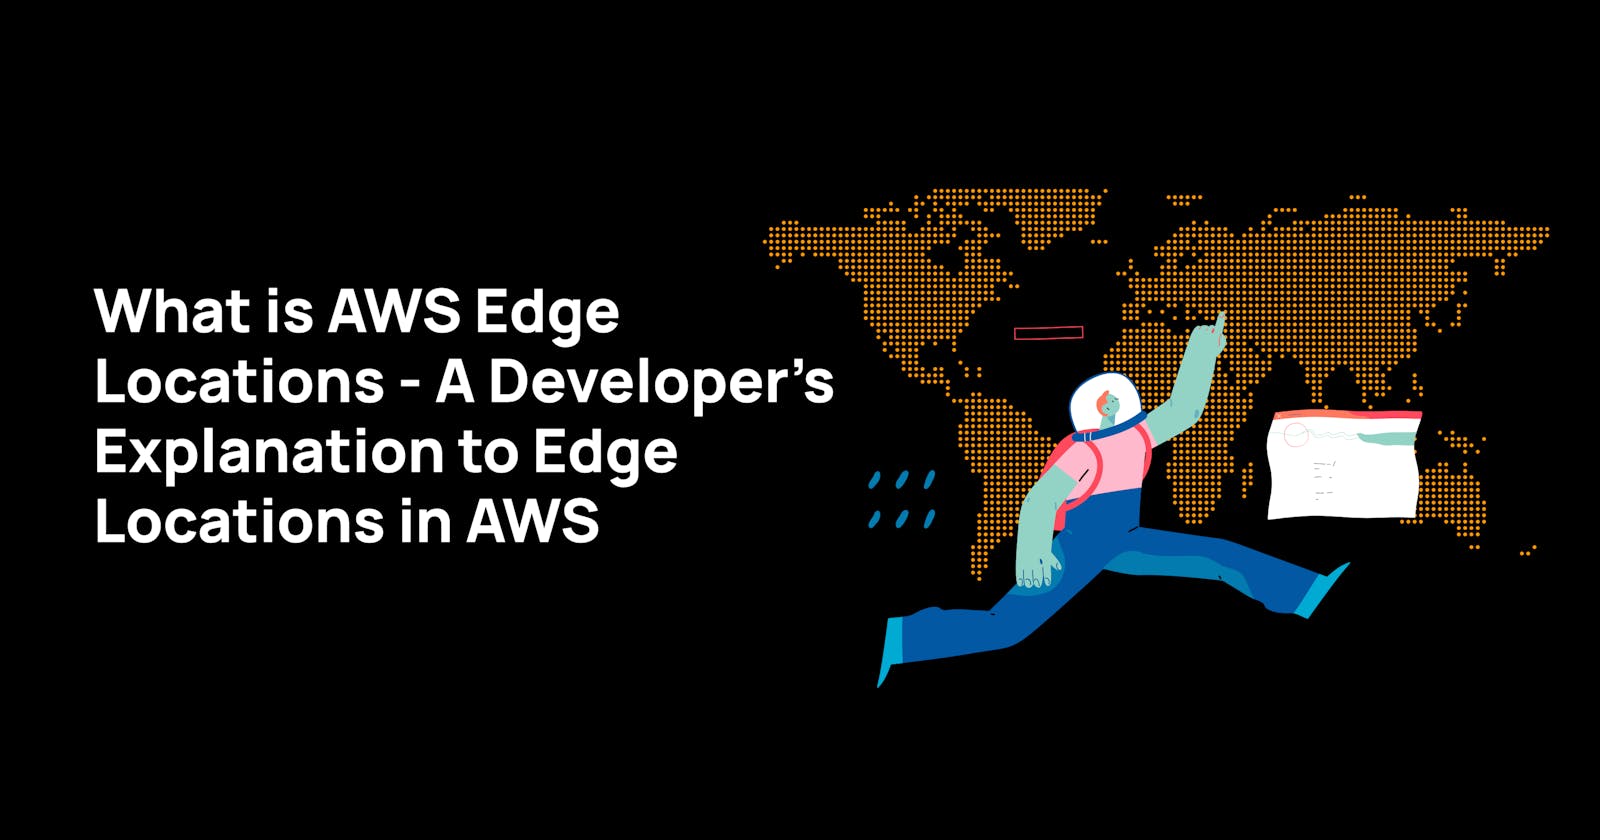 A Developer's Explanation to Edge Locations in AWS